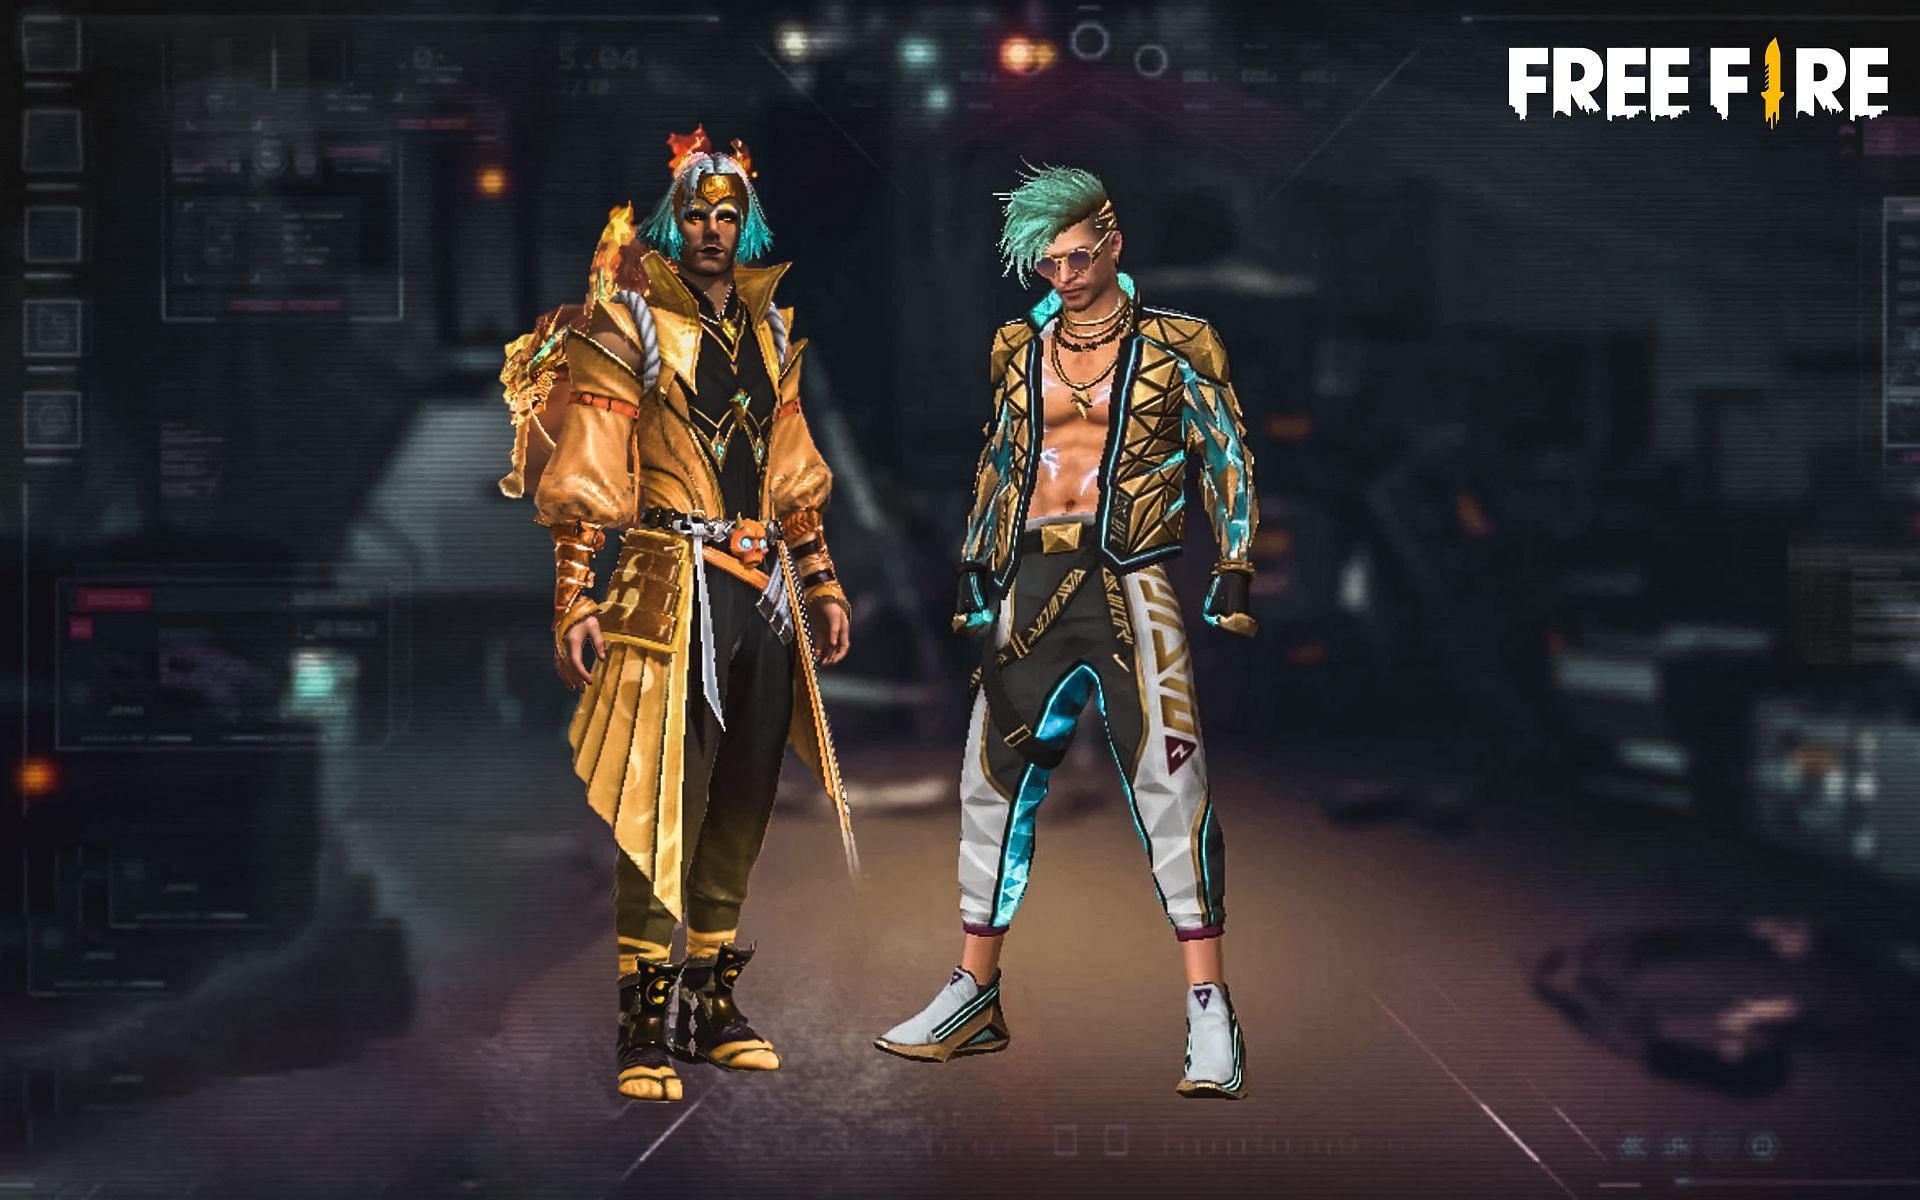 Getting the outfits is not an easy task in Free Fire (Image via Garena)